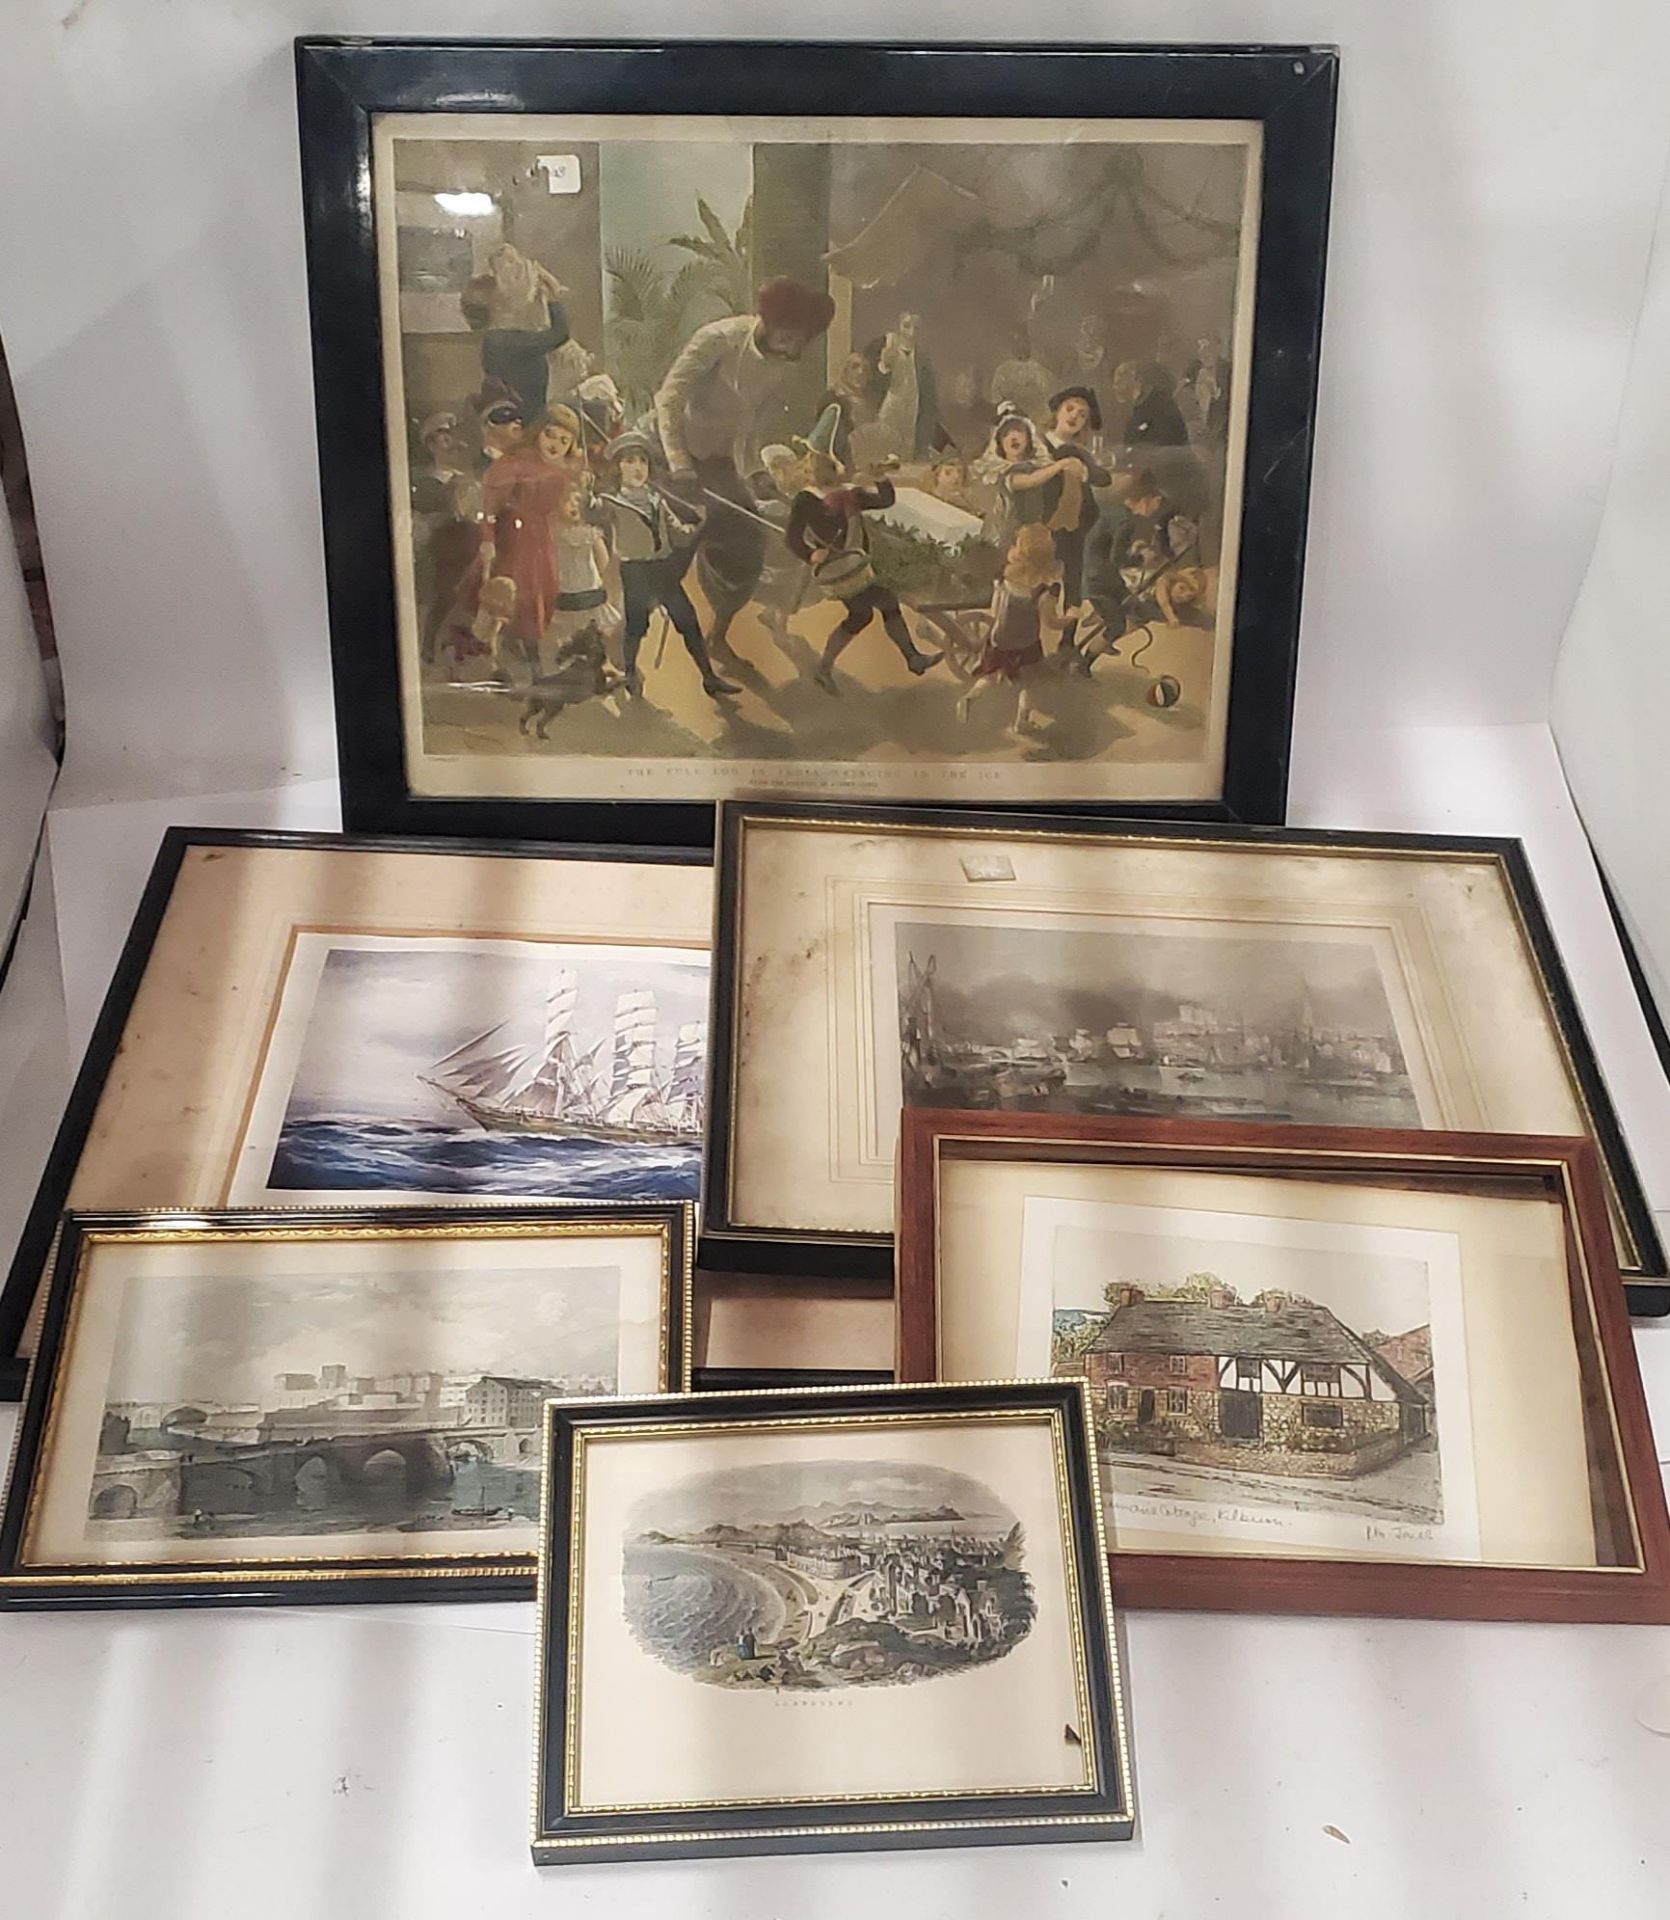 SIX VINTAGE FRAMED PRINTS TO INCLUDE 'THE YULE LOG IN INDIA-BRINGING IN THE ICE', SHIPS,